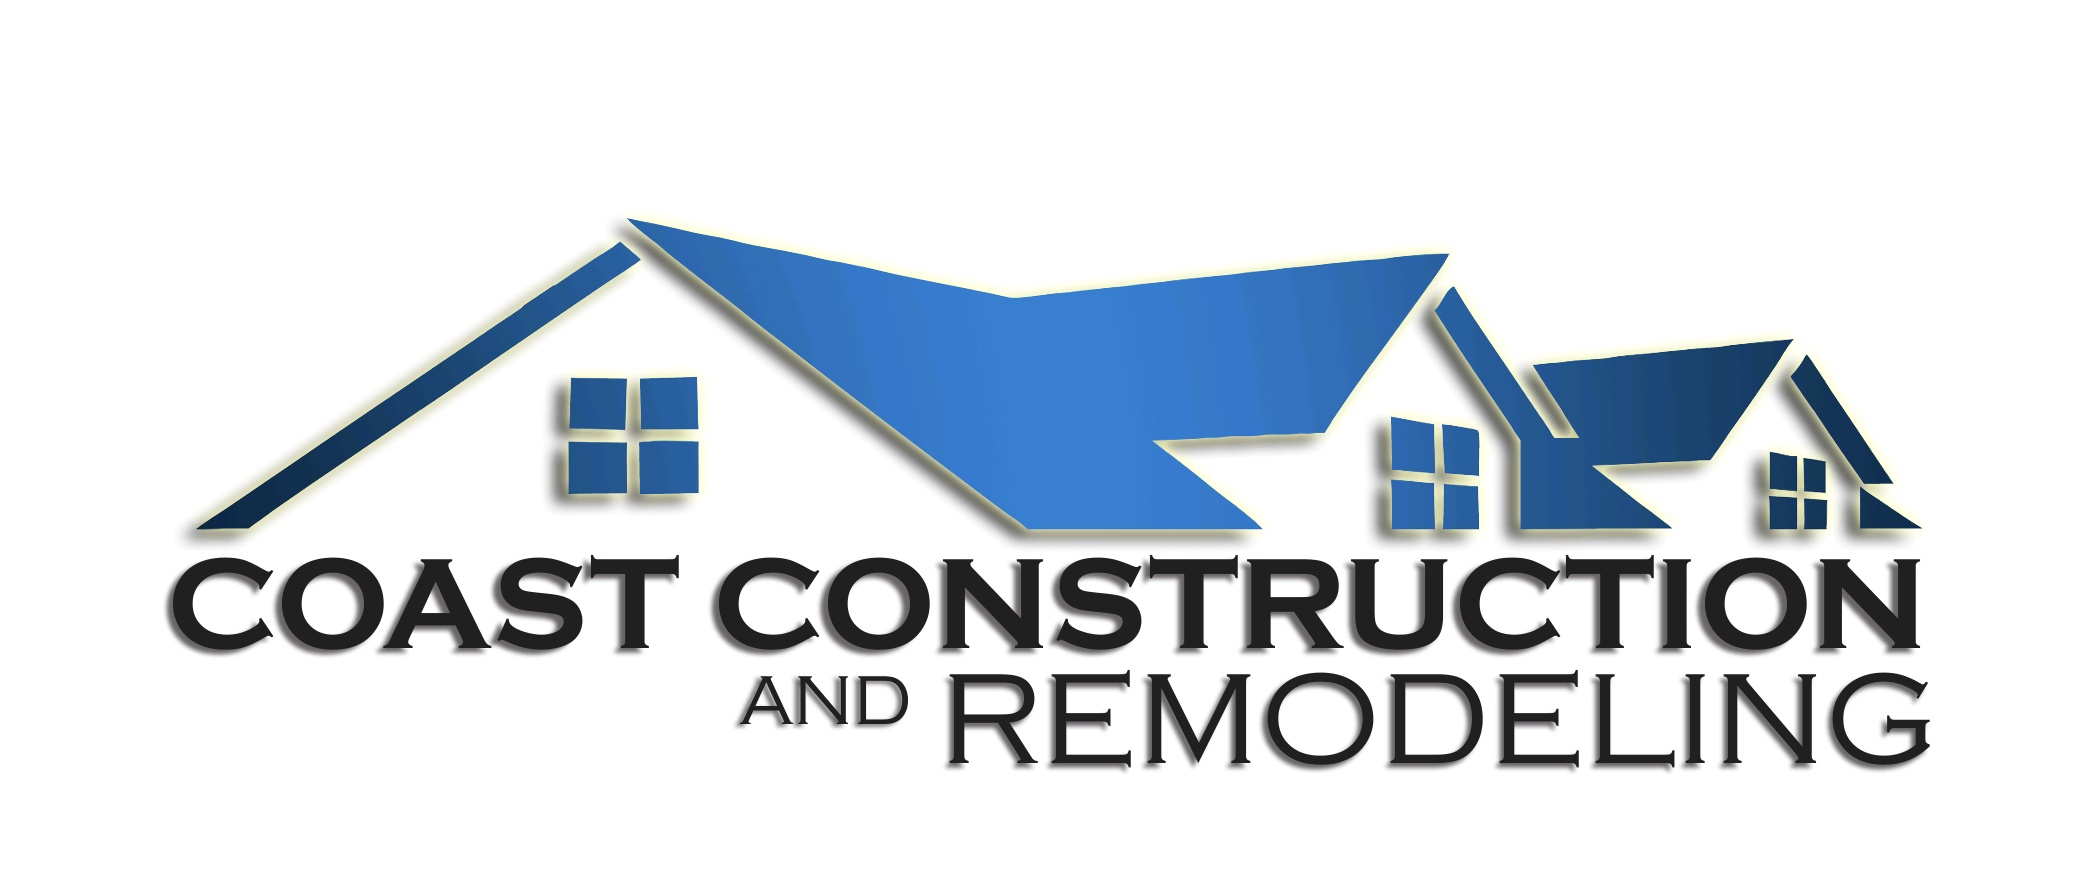 Coast Construction and Remodeling Logo